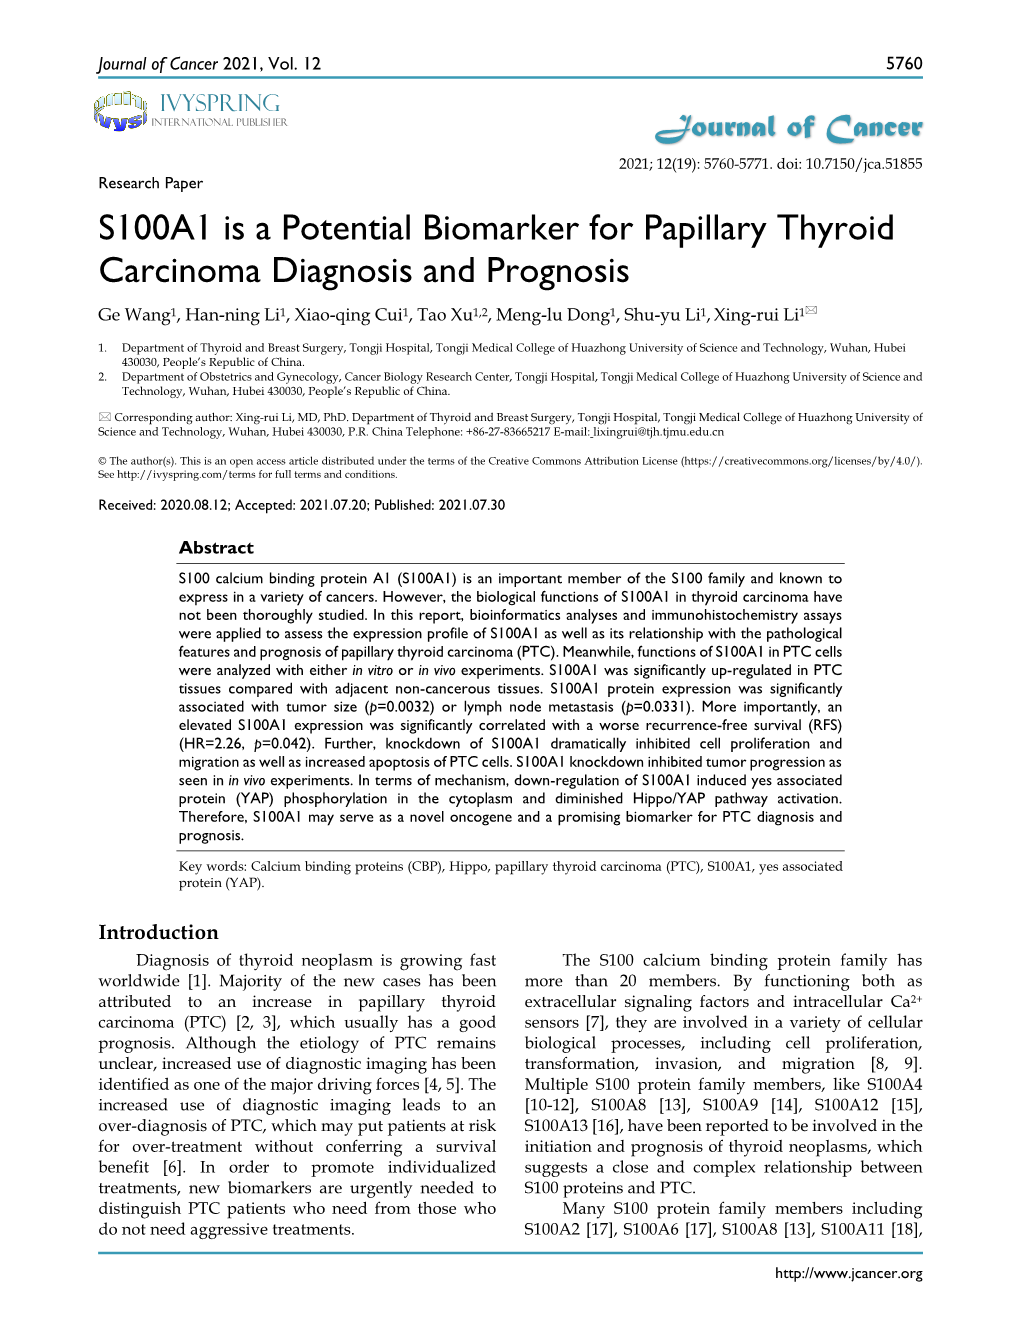 S100A1 Is a Potential Biomarker for Papillary Thyroid Carcinoma